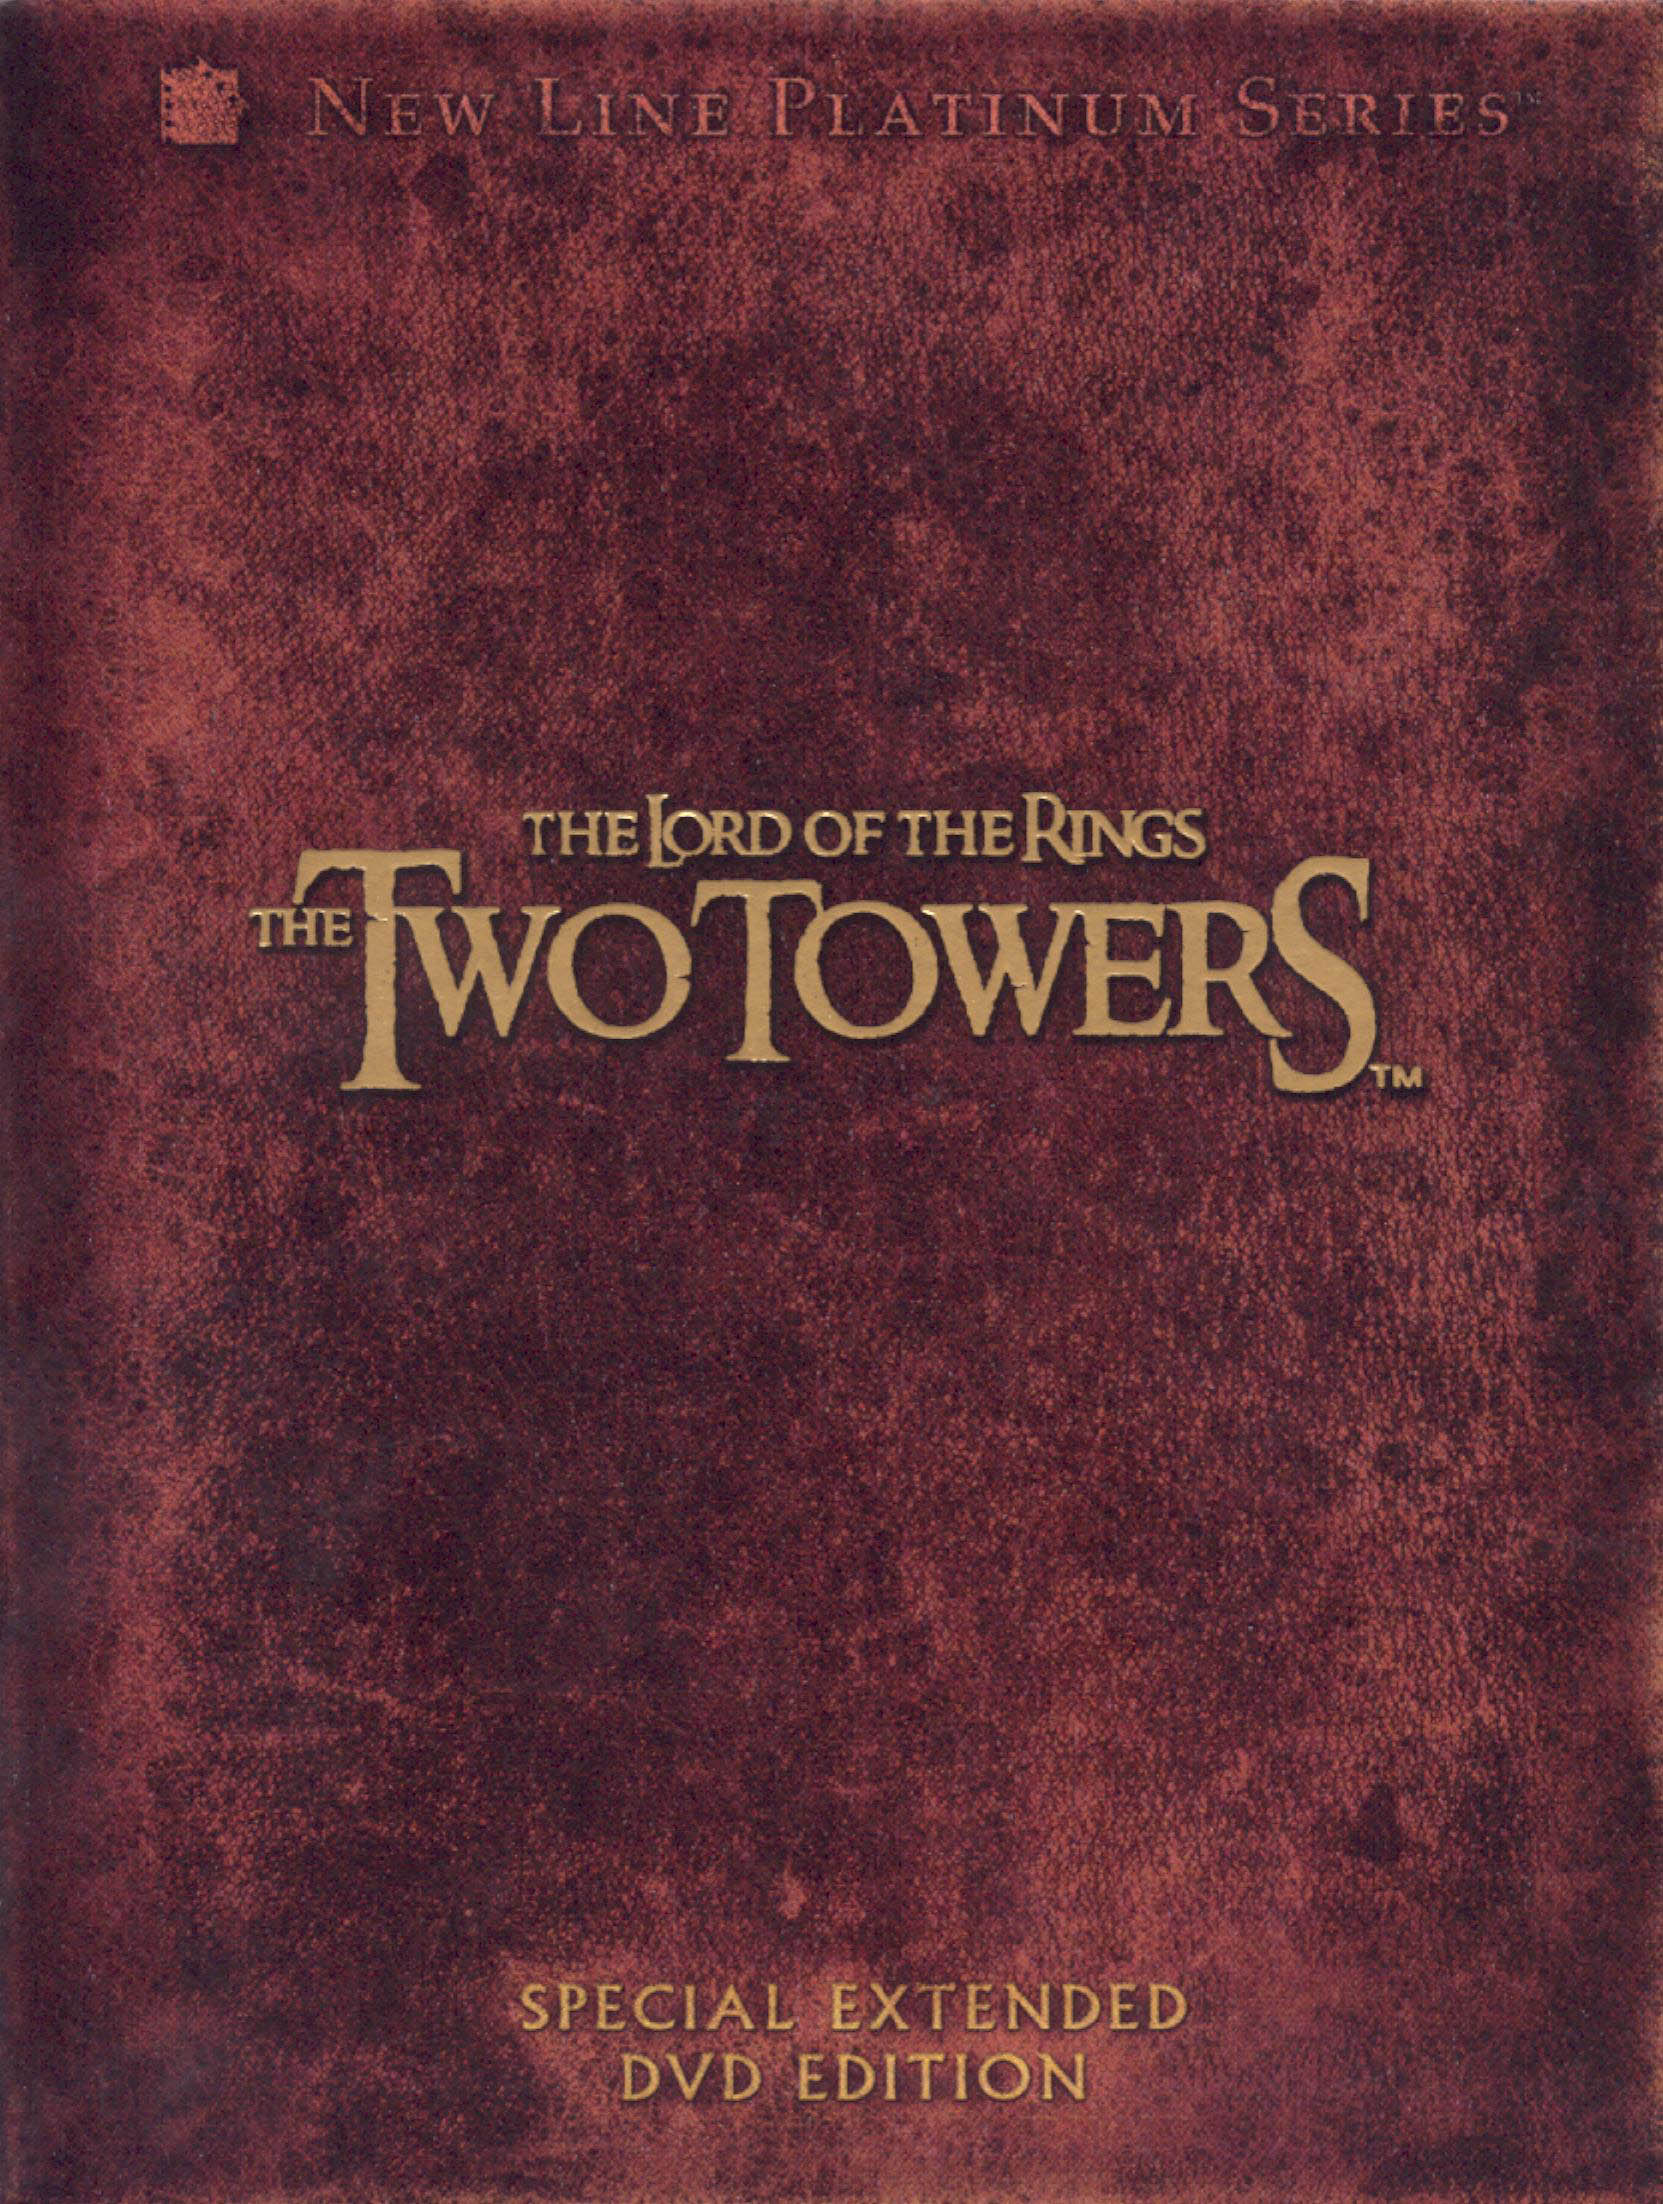 The Lord of the Rings: The Two Towers (2002) Movie Information & Trailers